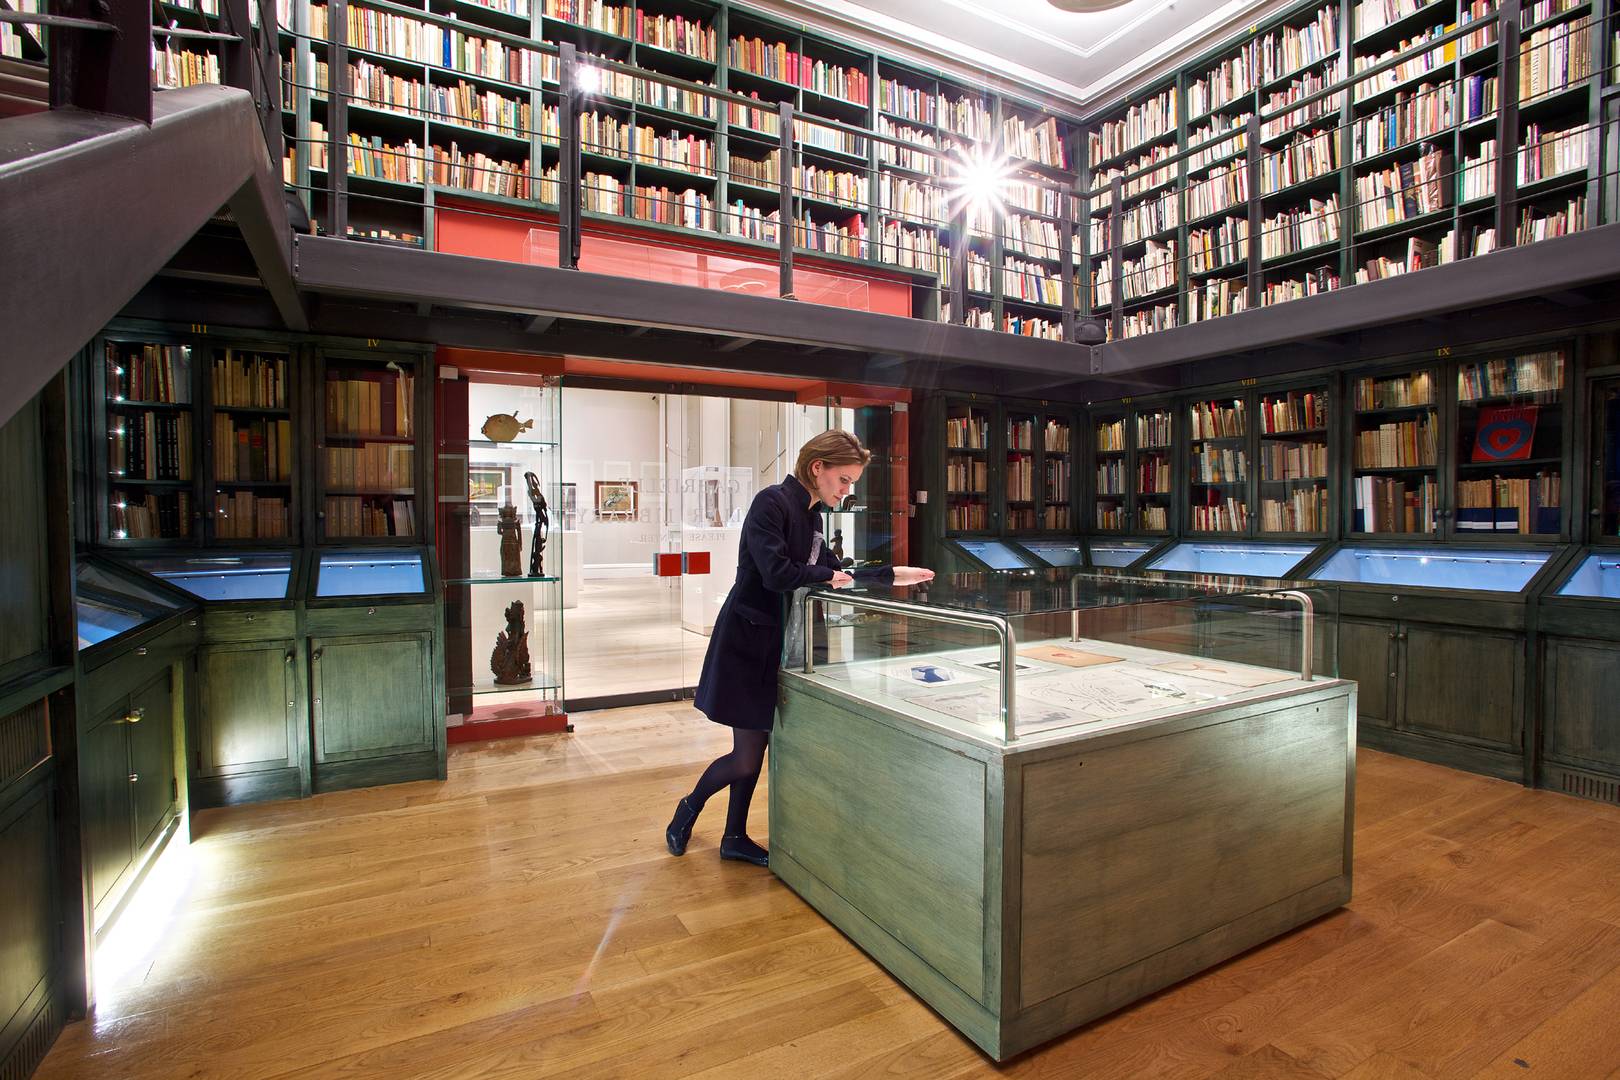 A woman in the art gallery library,© National Galleries Scotland